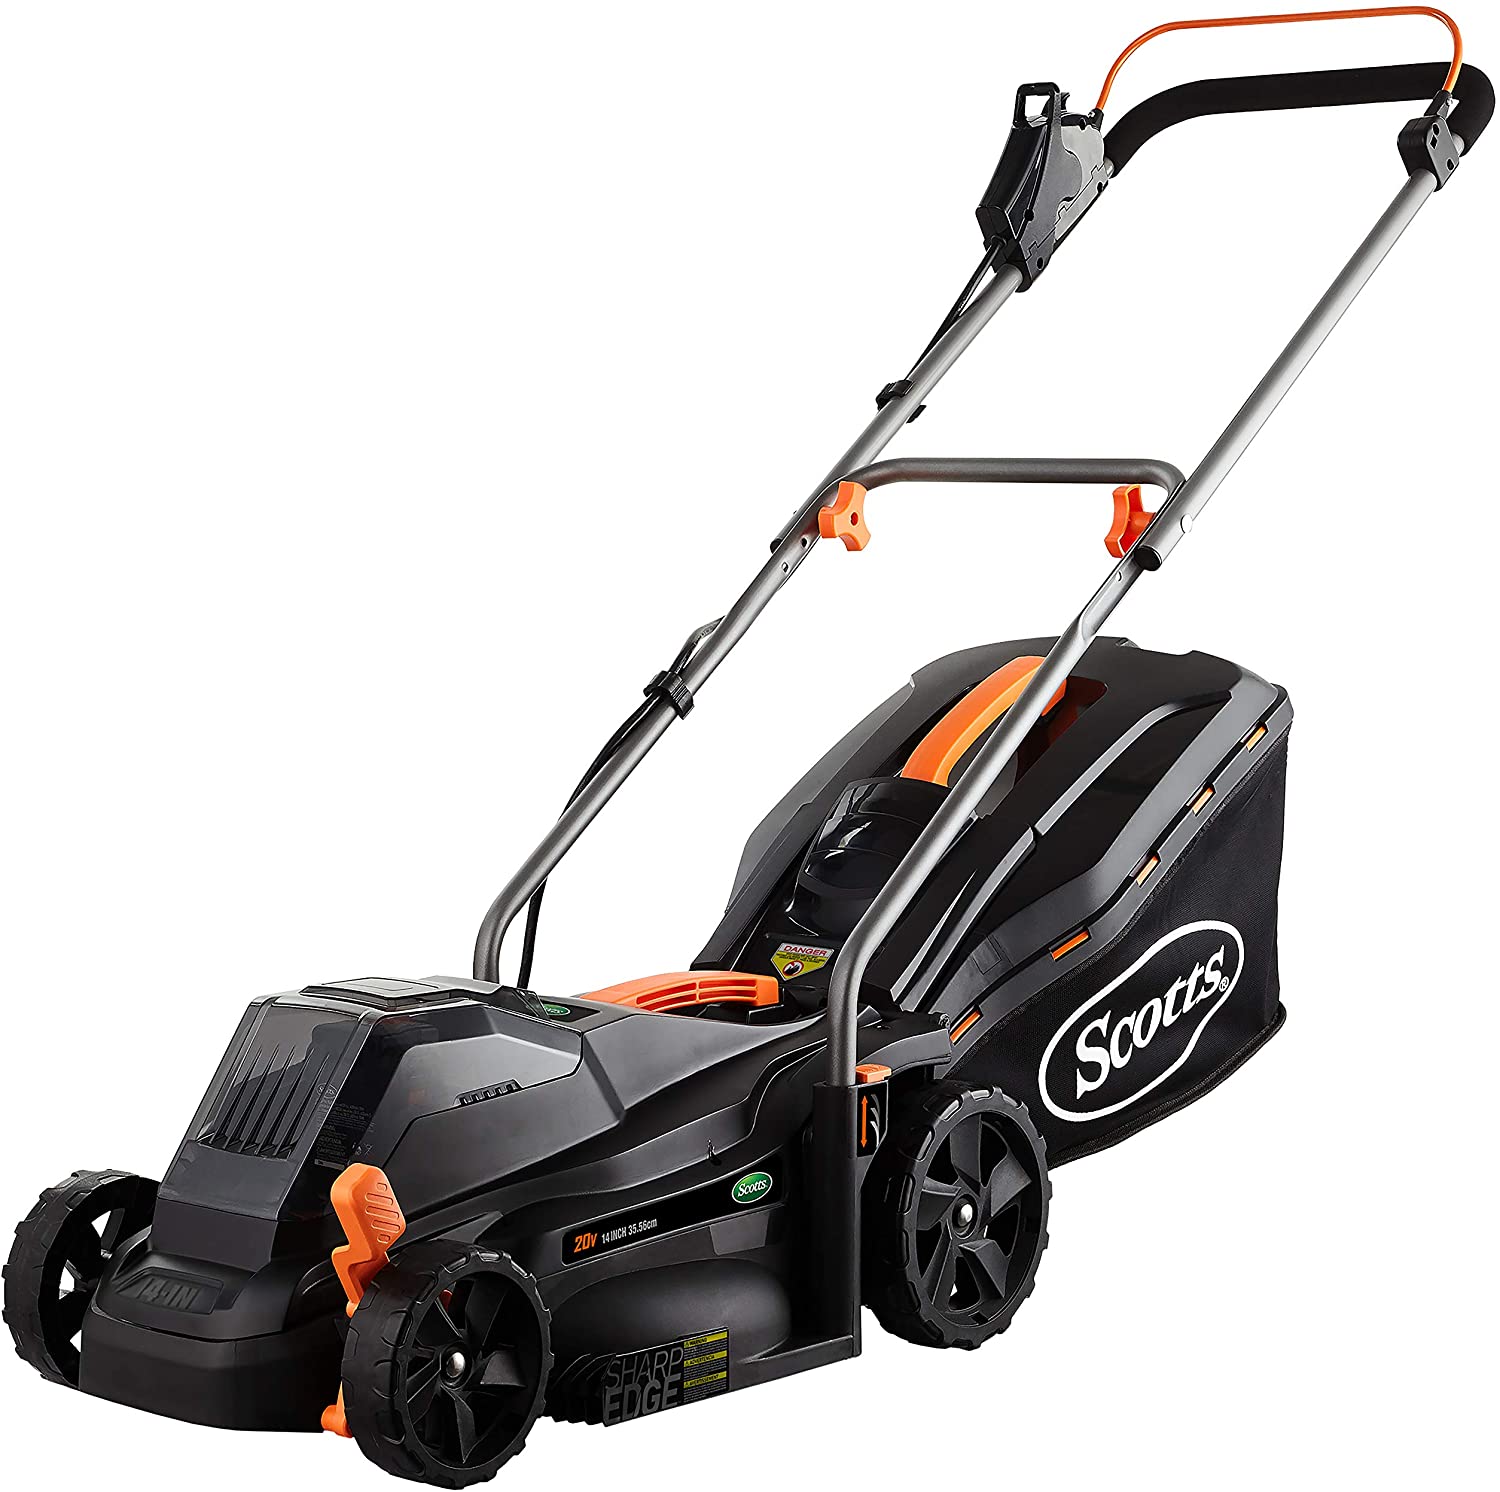 Scotts Outdoor Power Tools 62014S 14-Inch 20-Volt Cordless Lawn Mower, Black - image 1 of 6